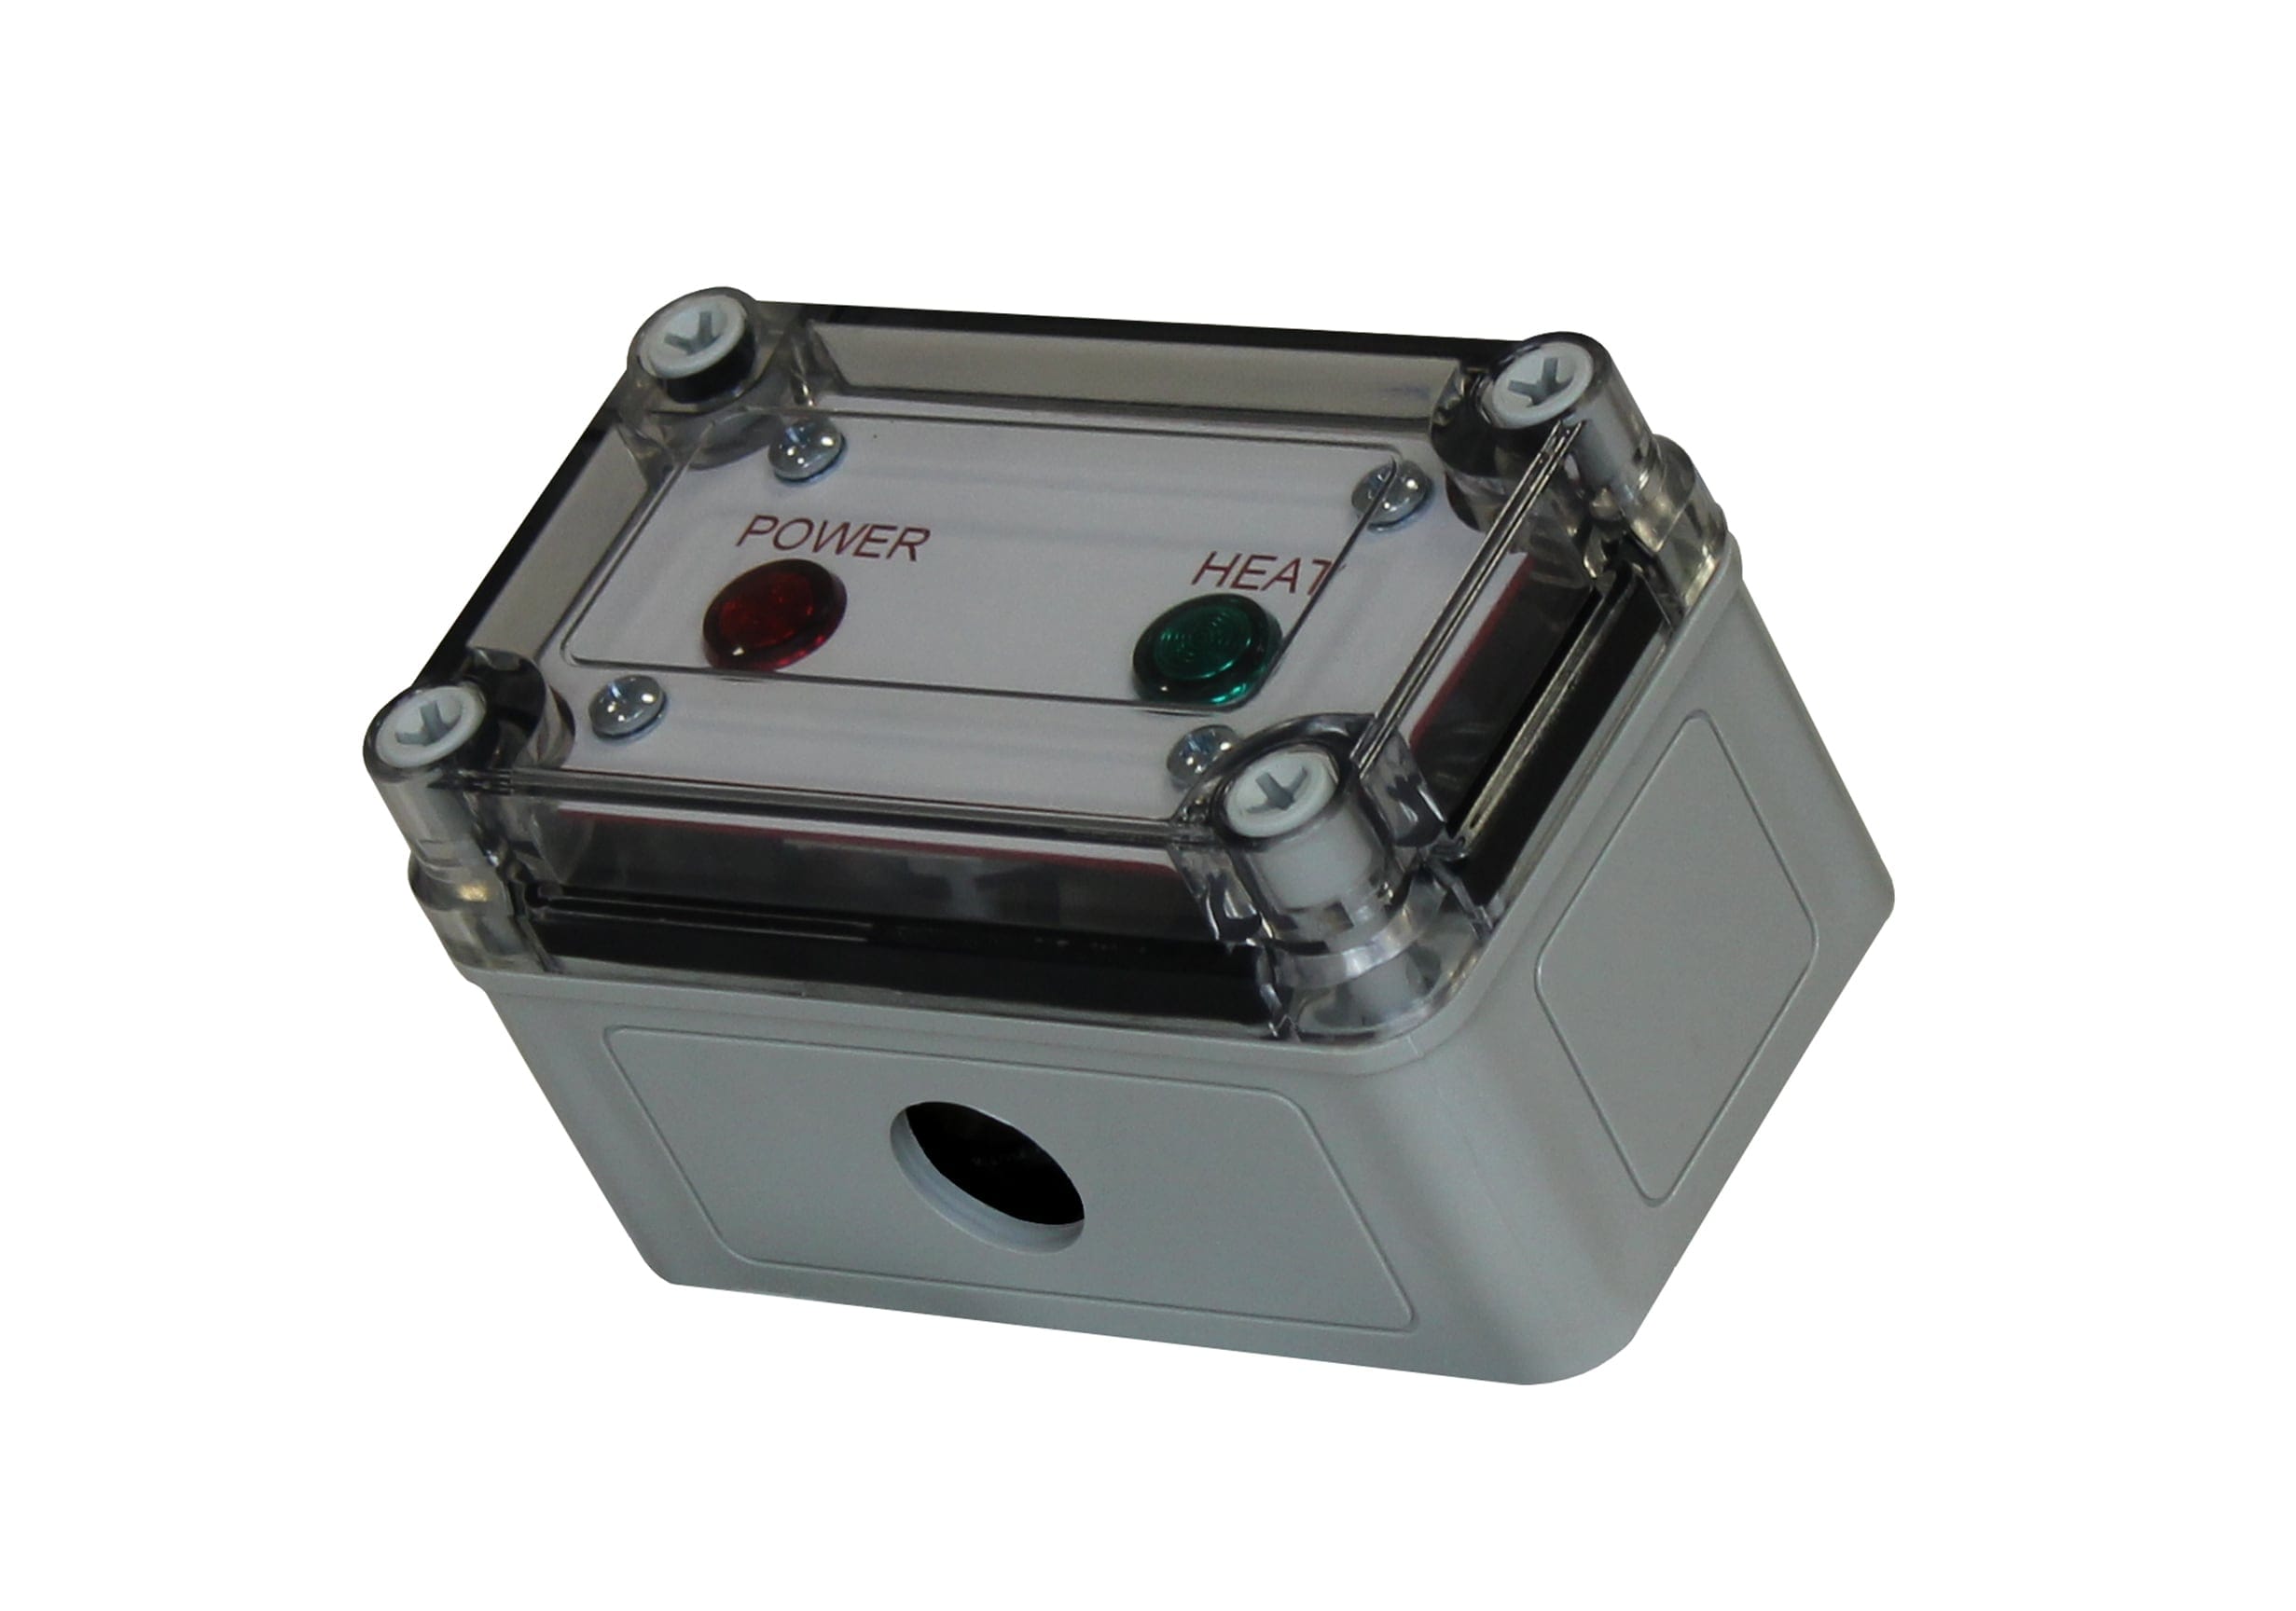 Heat Trace and Power Verification junction box